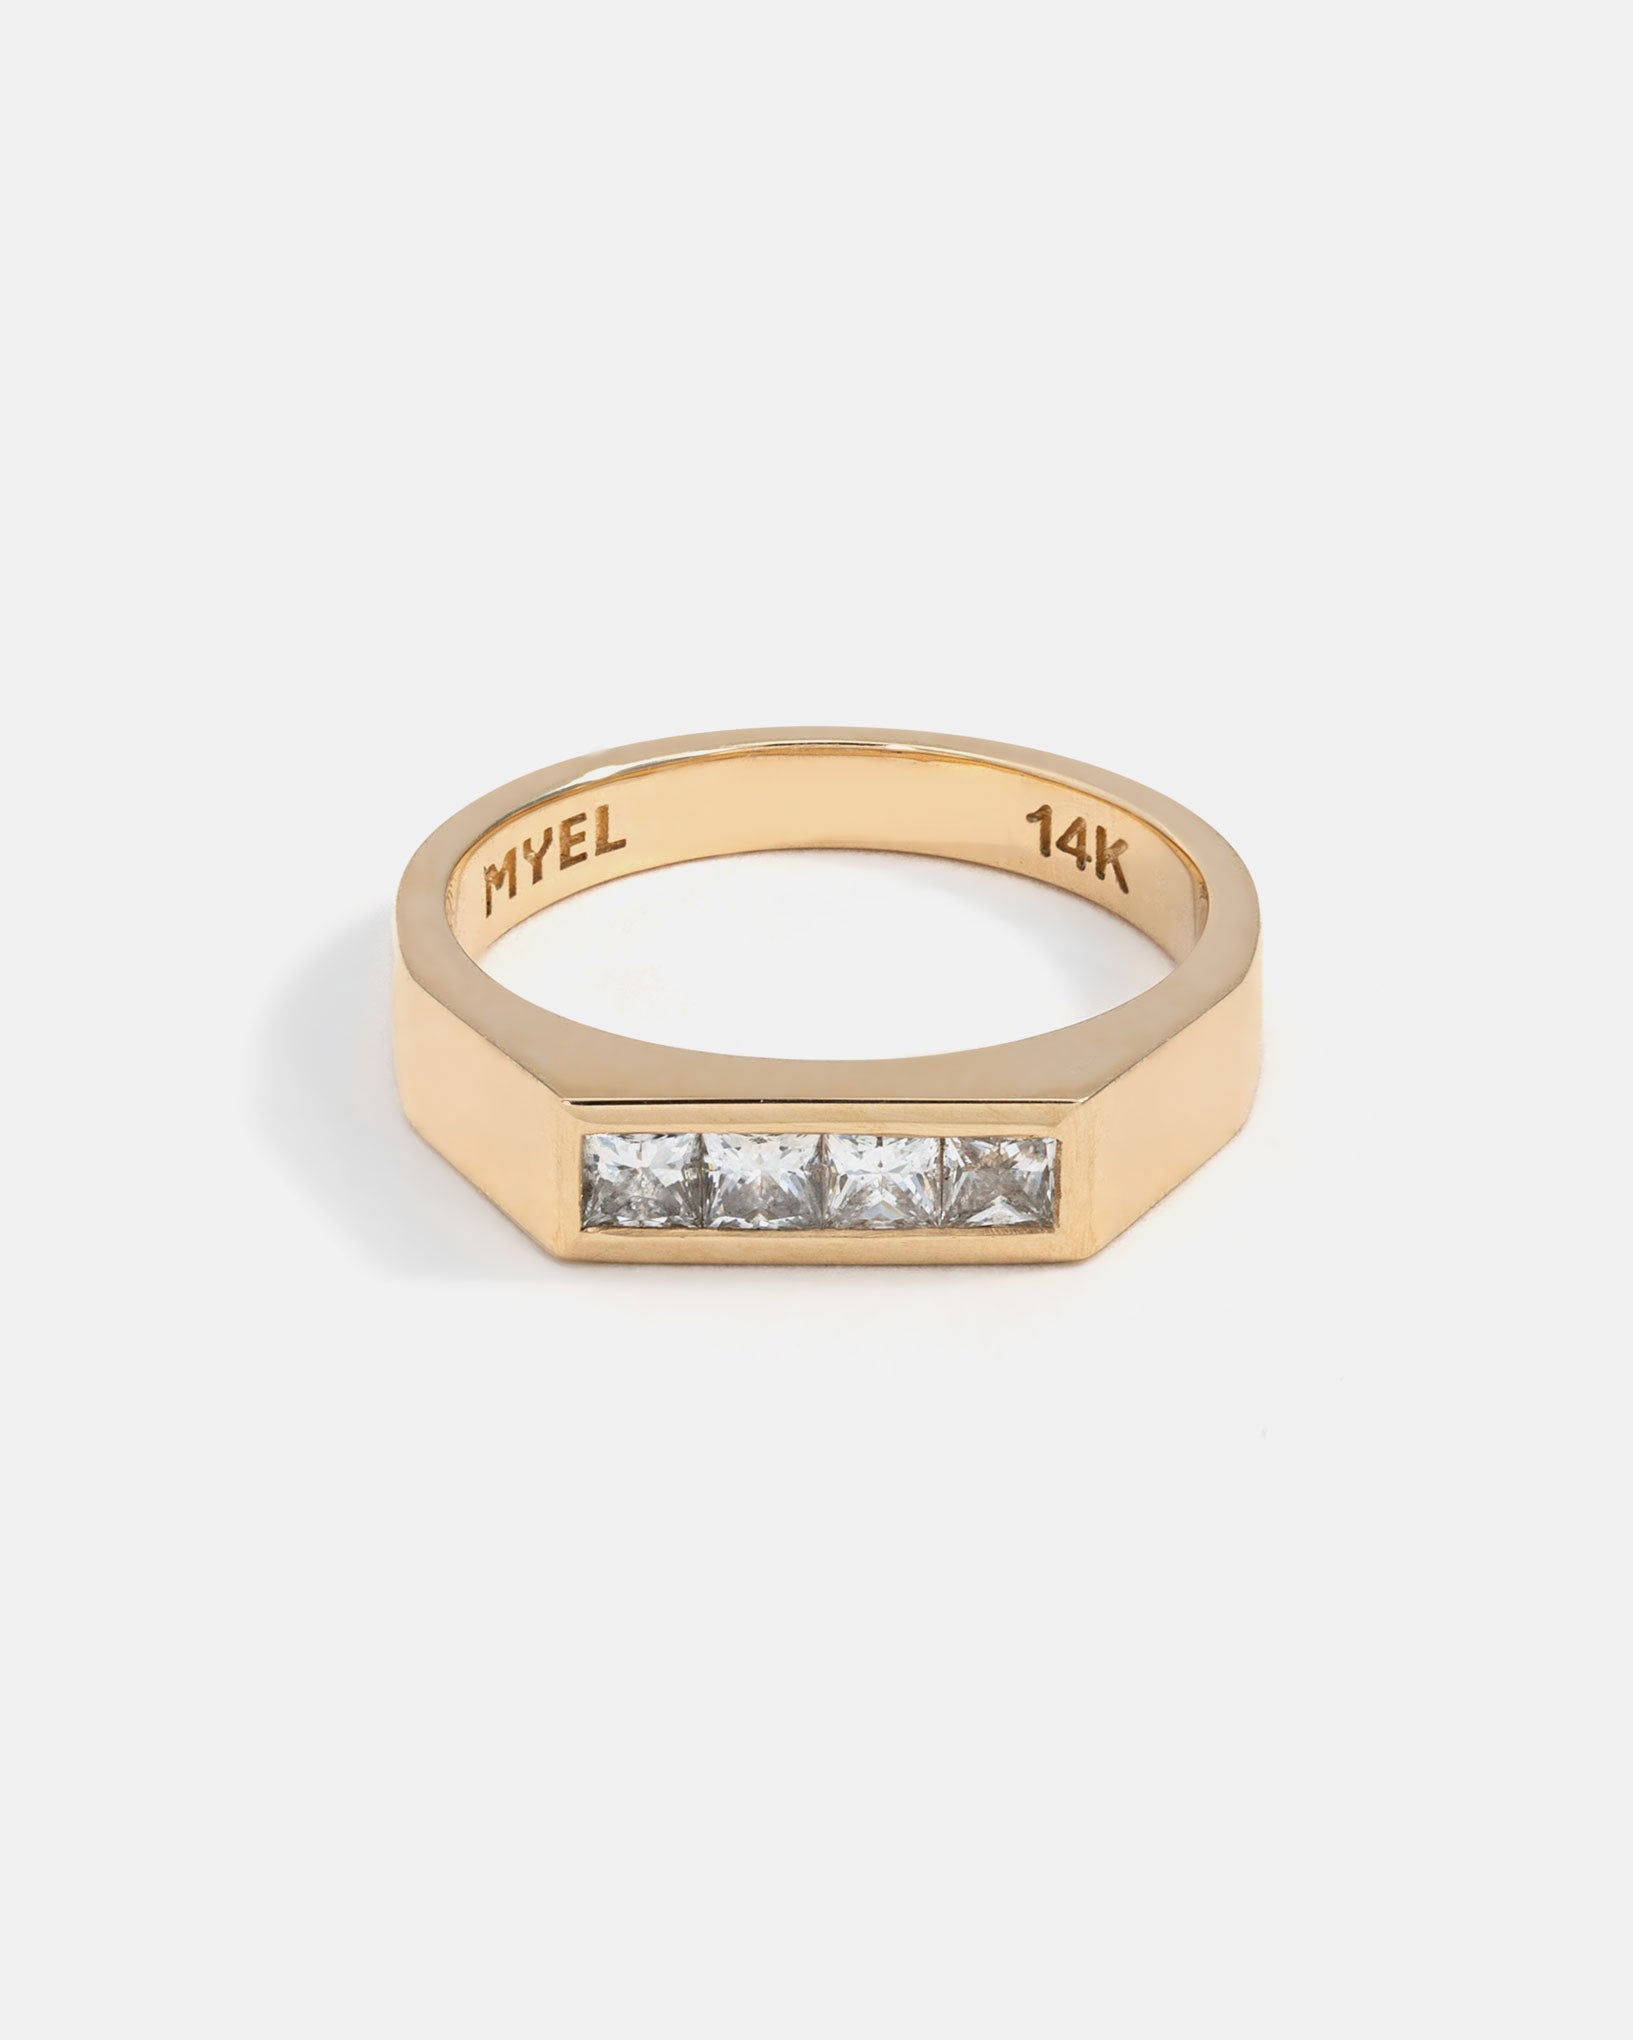 Theory 1 Ring in 14k Fairmined Gold with lab grown Diamonds